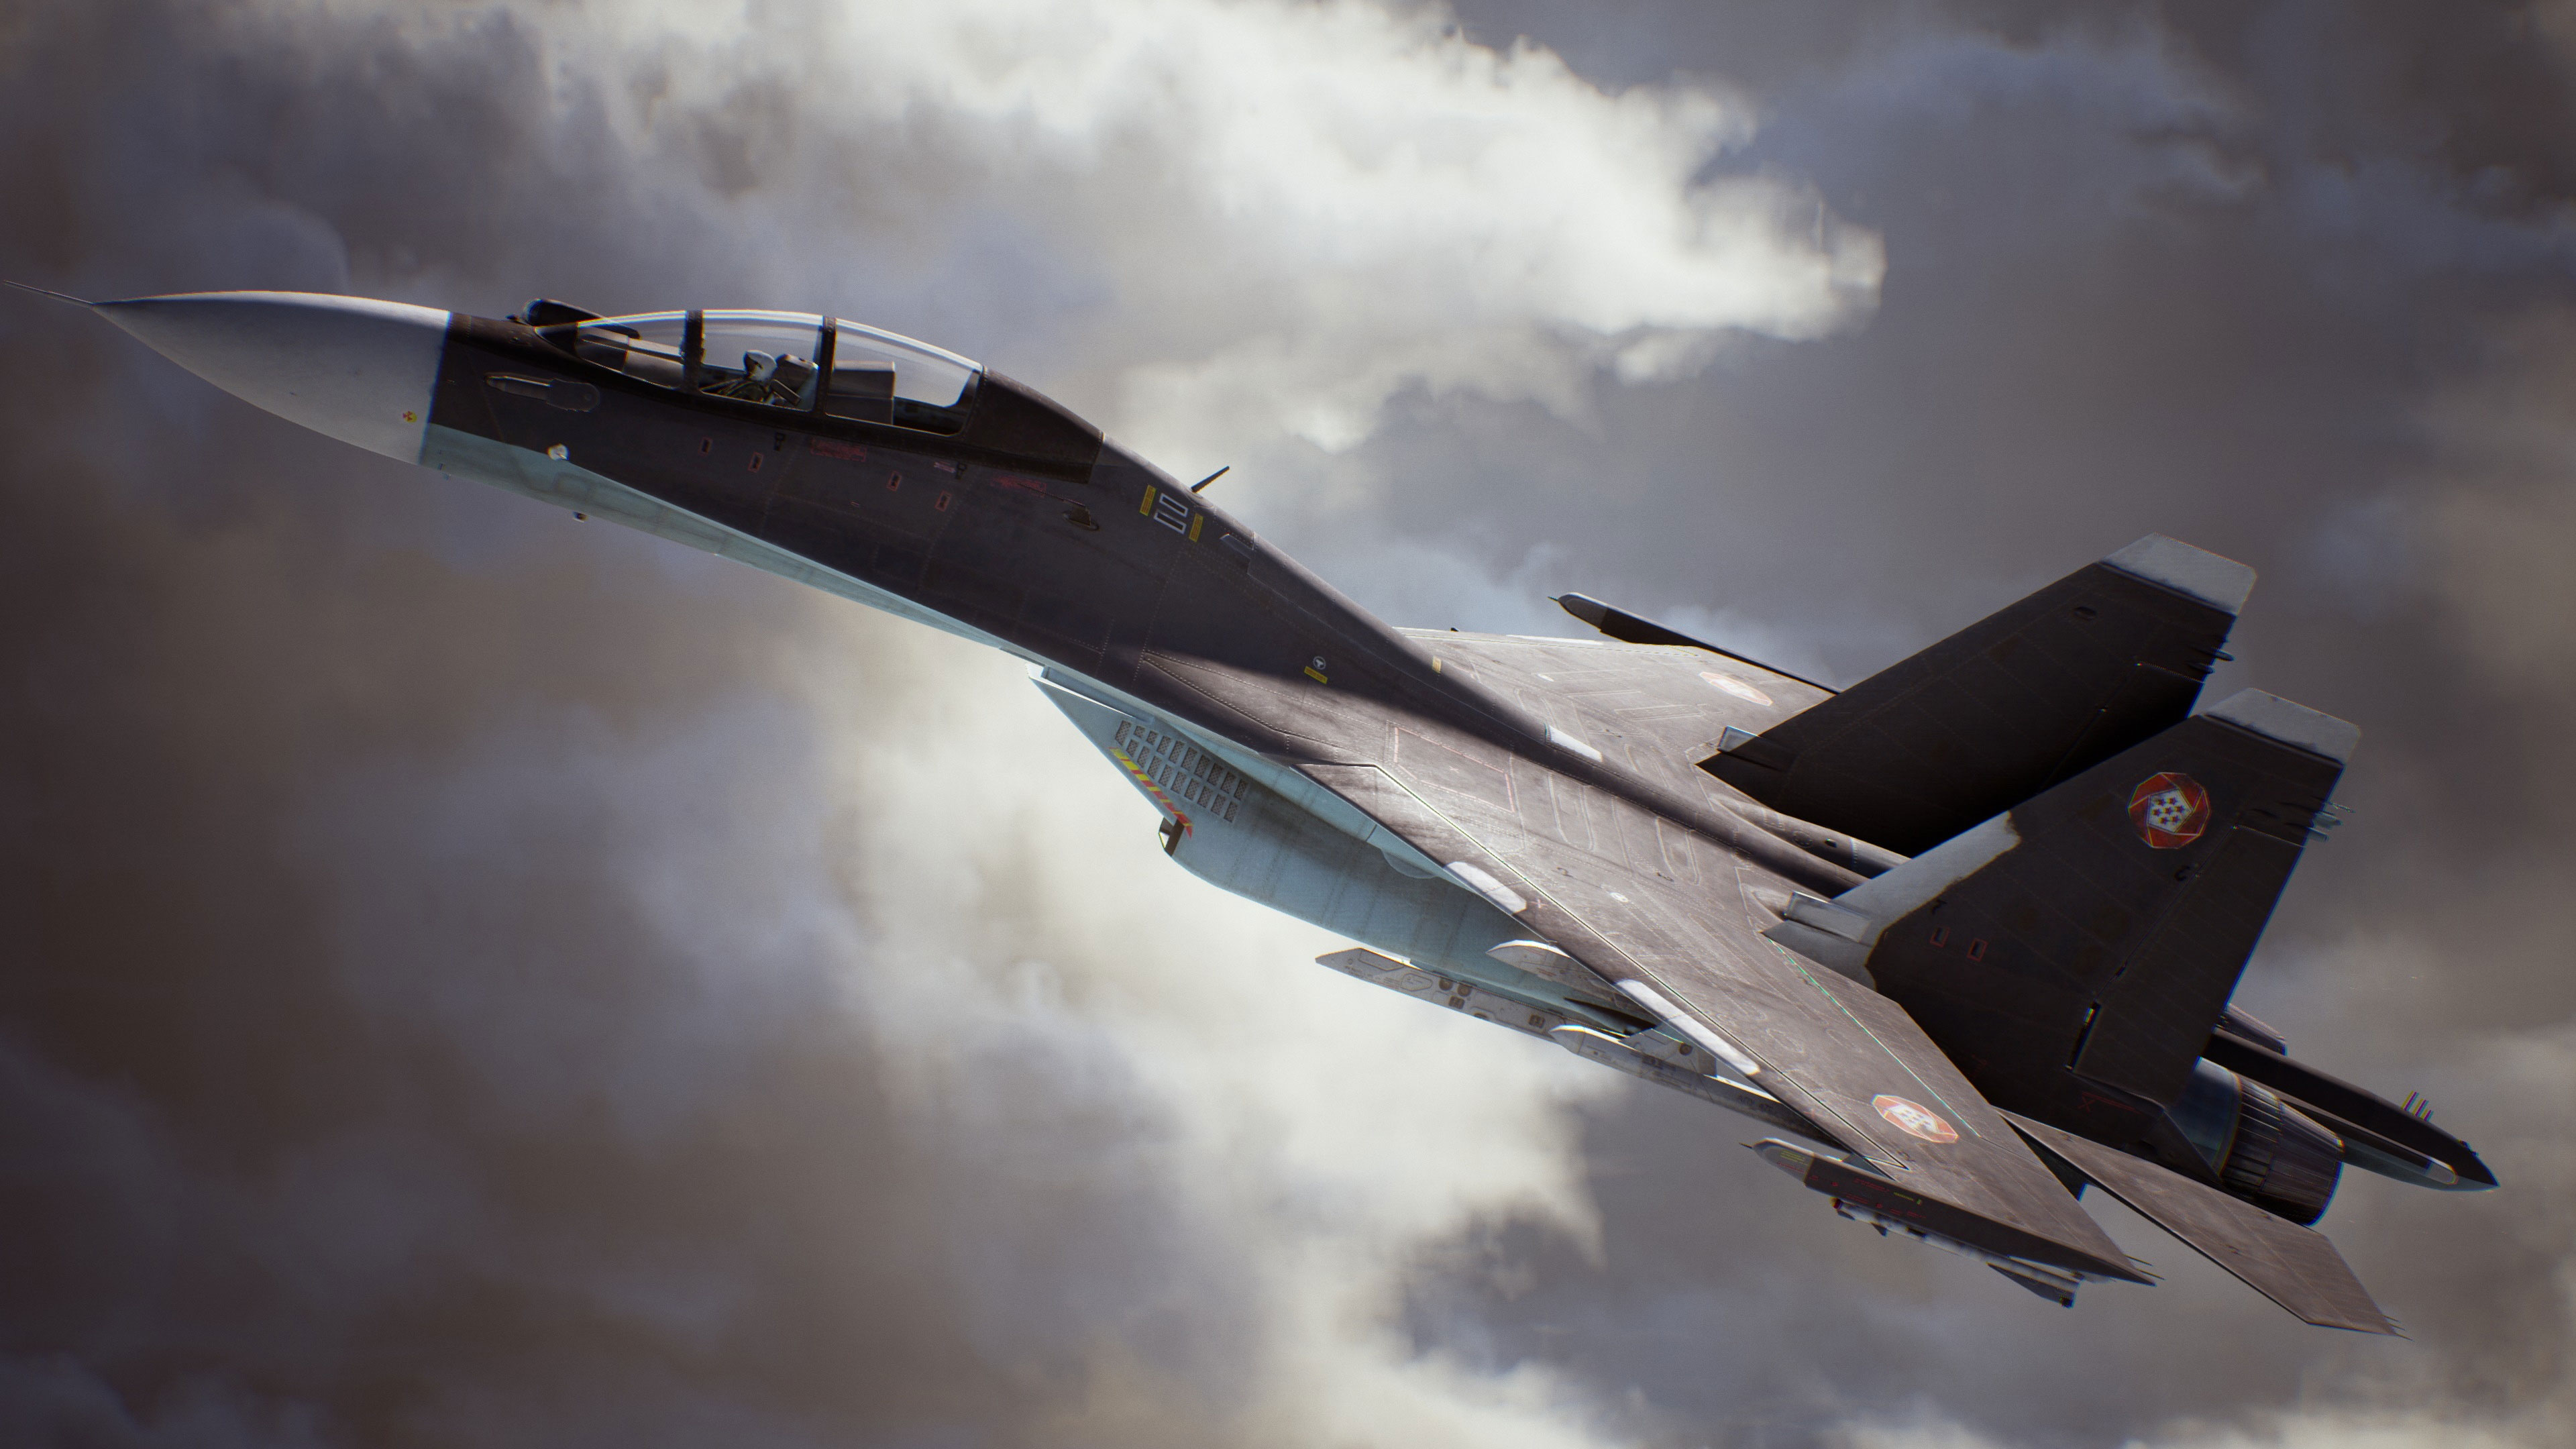 Ace Combat 7: Skies Unknown Wallpapers in Ultra HD | 4K - Gameranx